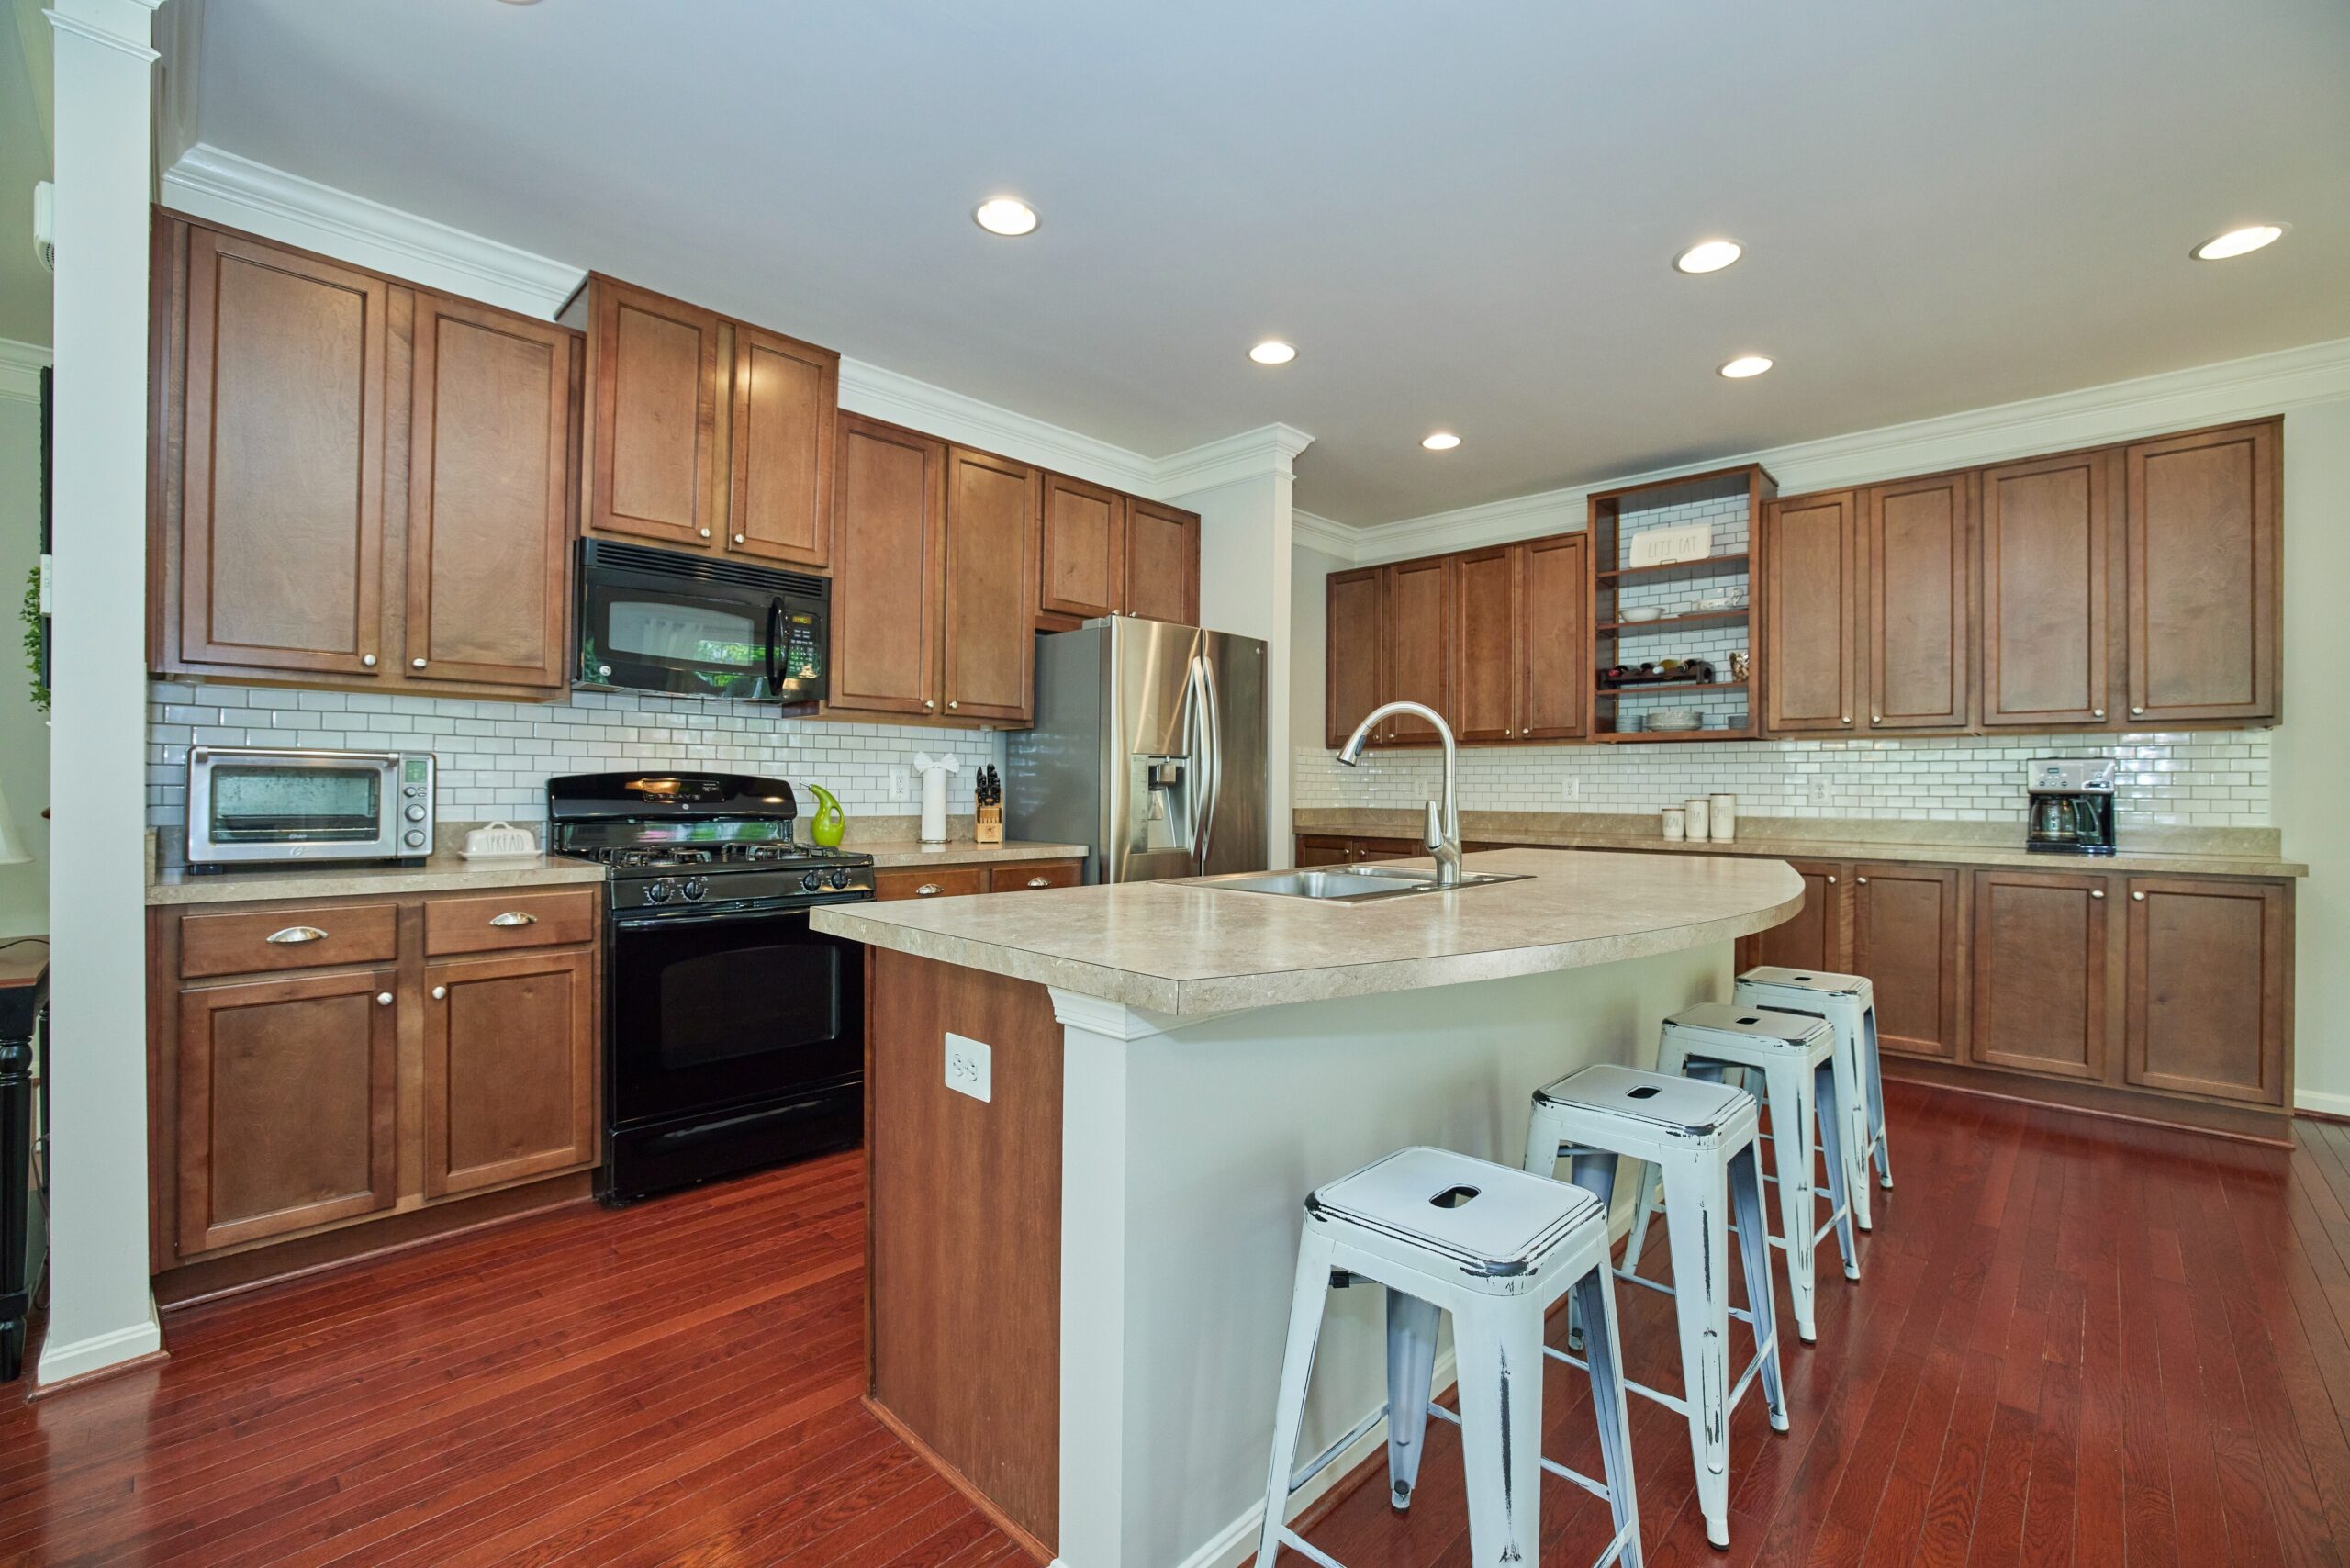 Professional interior photo of 12030 Lake Dorian Drive, Bristow, VA - showing the kitchen with dark wooden cabinets, black range, stainless fridge and large island with sink